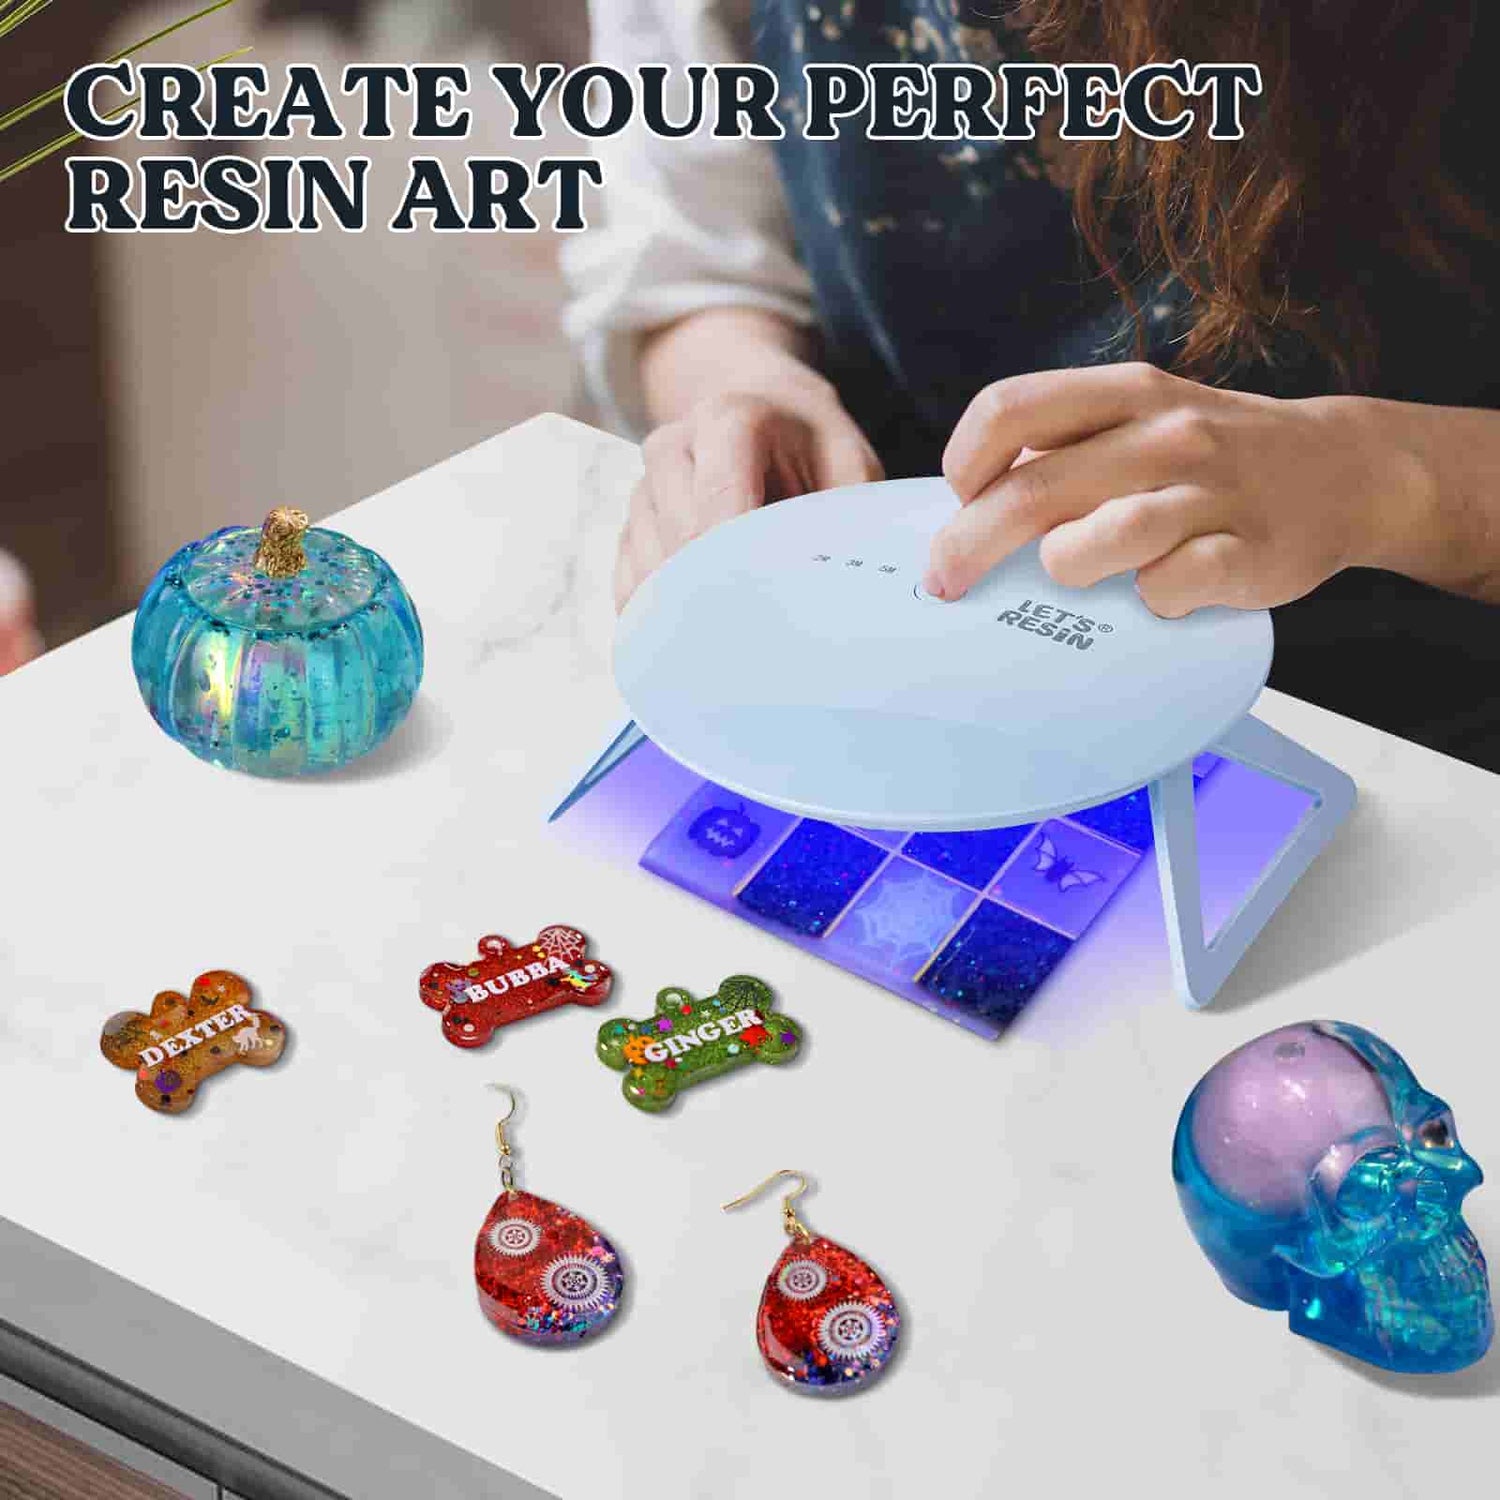 LETS RESIN UV Resin Kit with Light Bonding&Curing in Seconds 25g